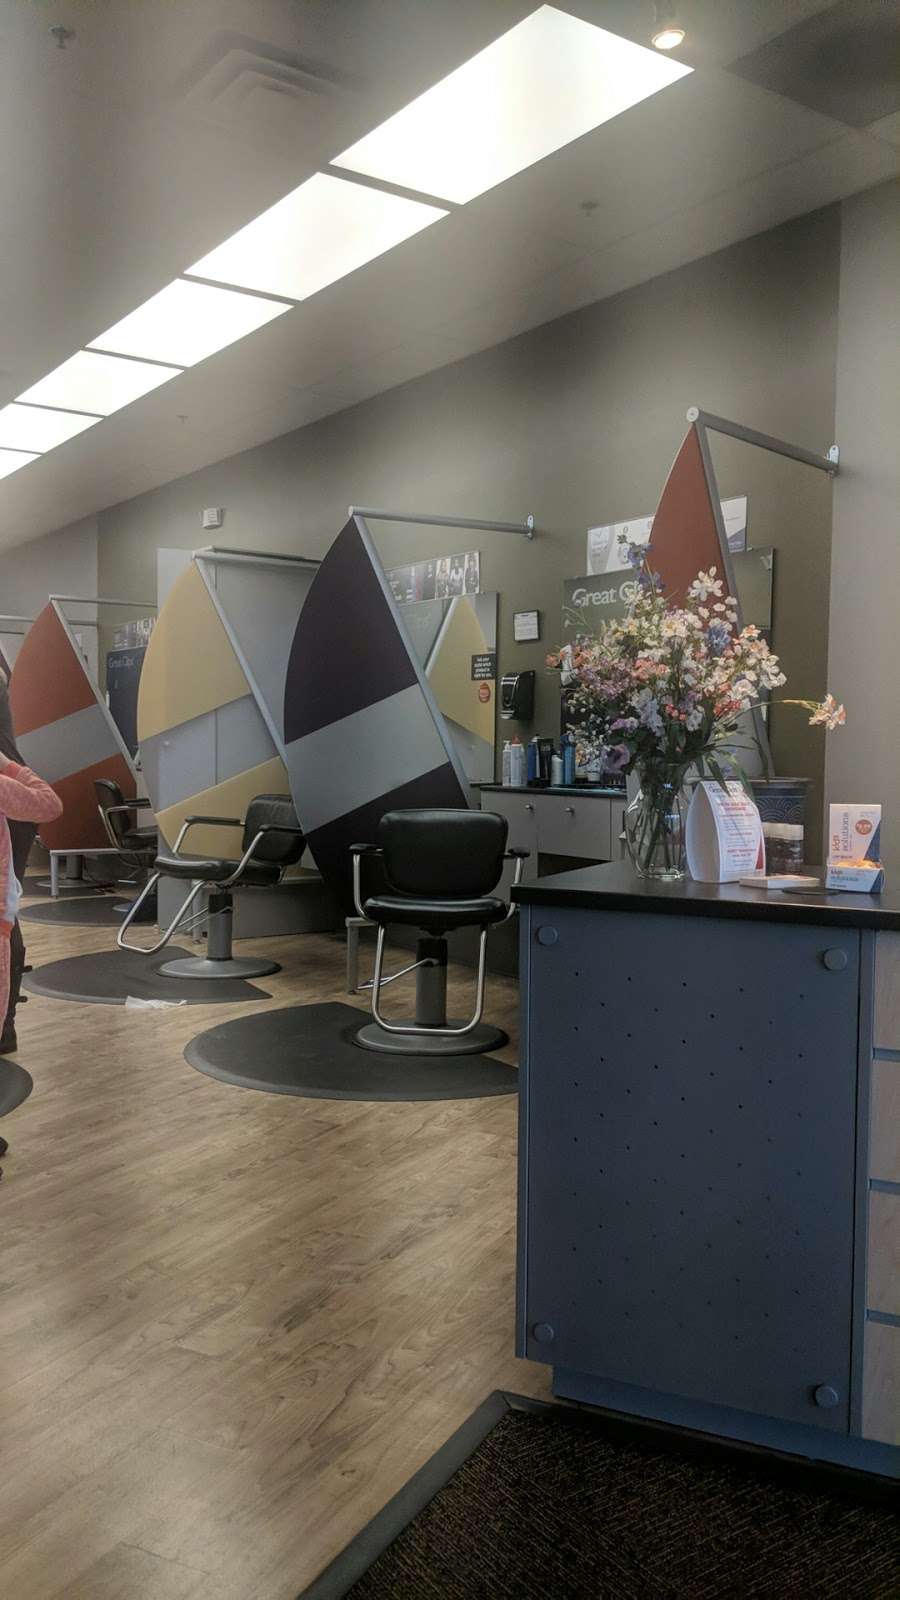 Great Clips | 11503 Spring Mill Rd Ste 600, Carmel, IN 46032, USA | Phone: (317) 708-4690